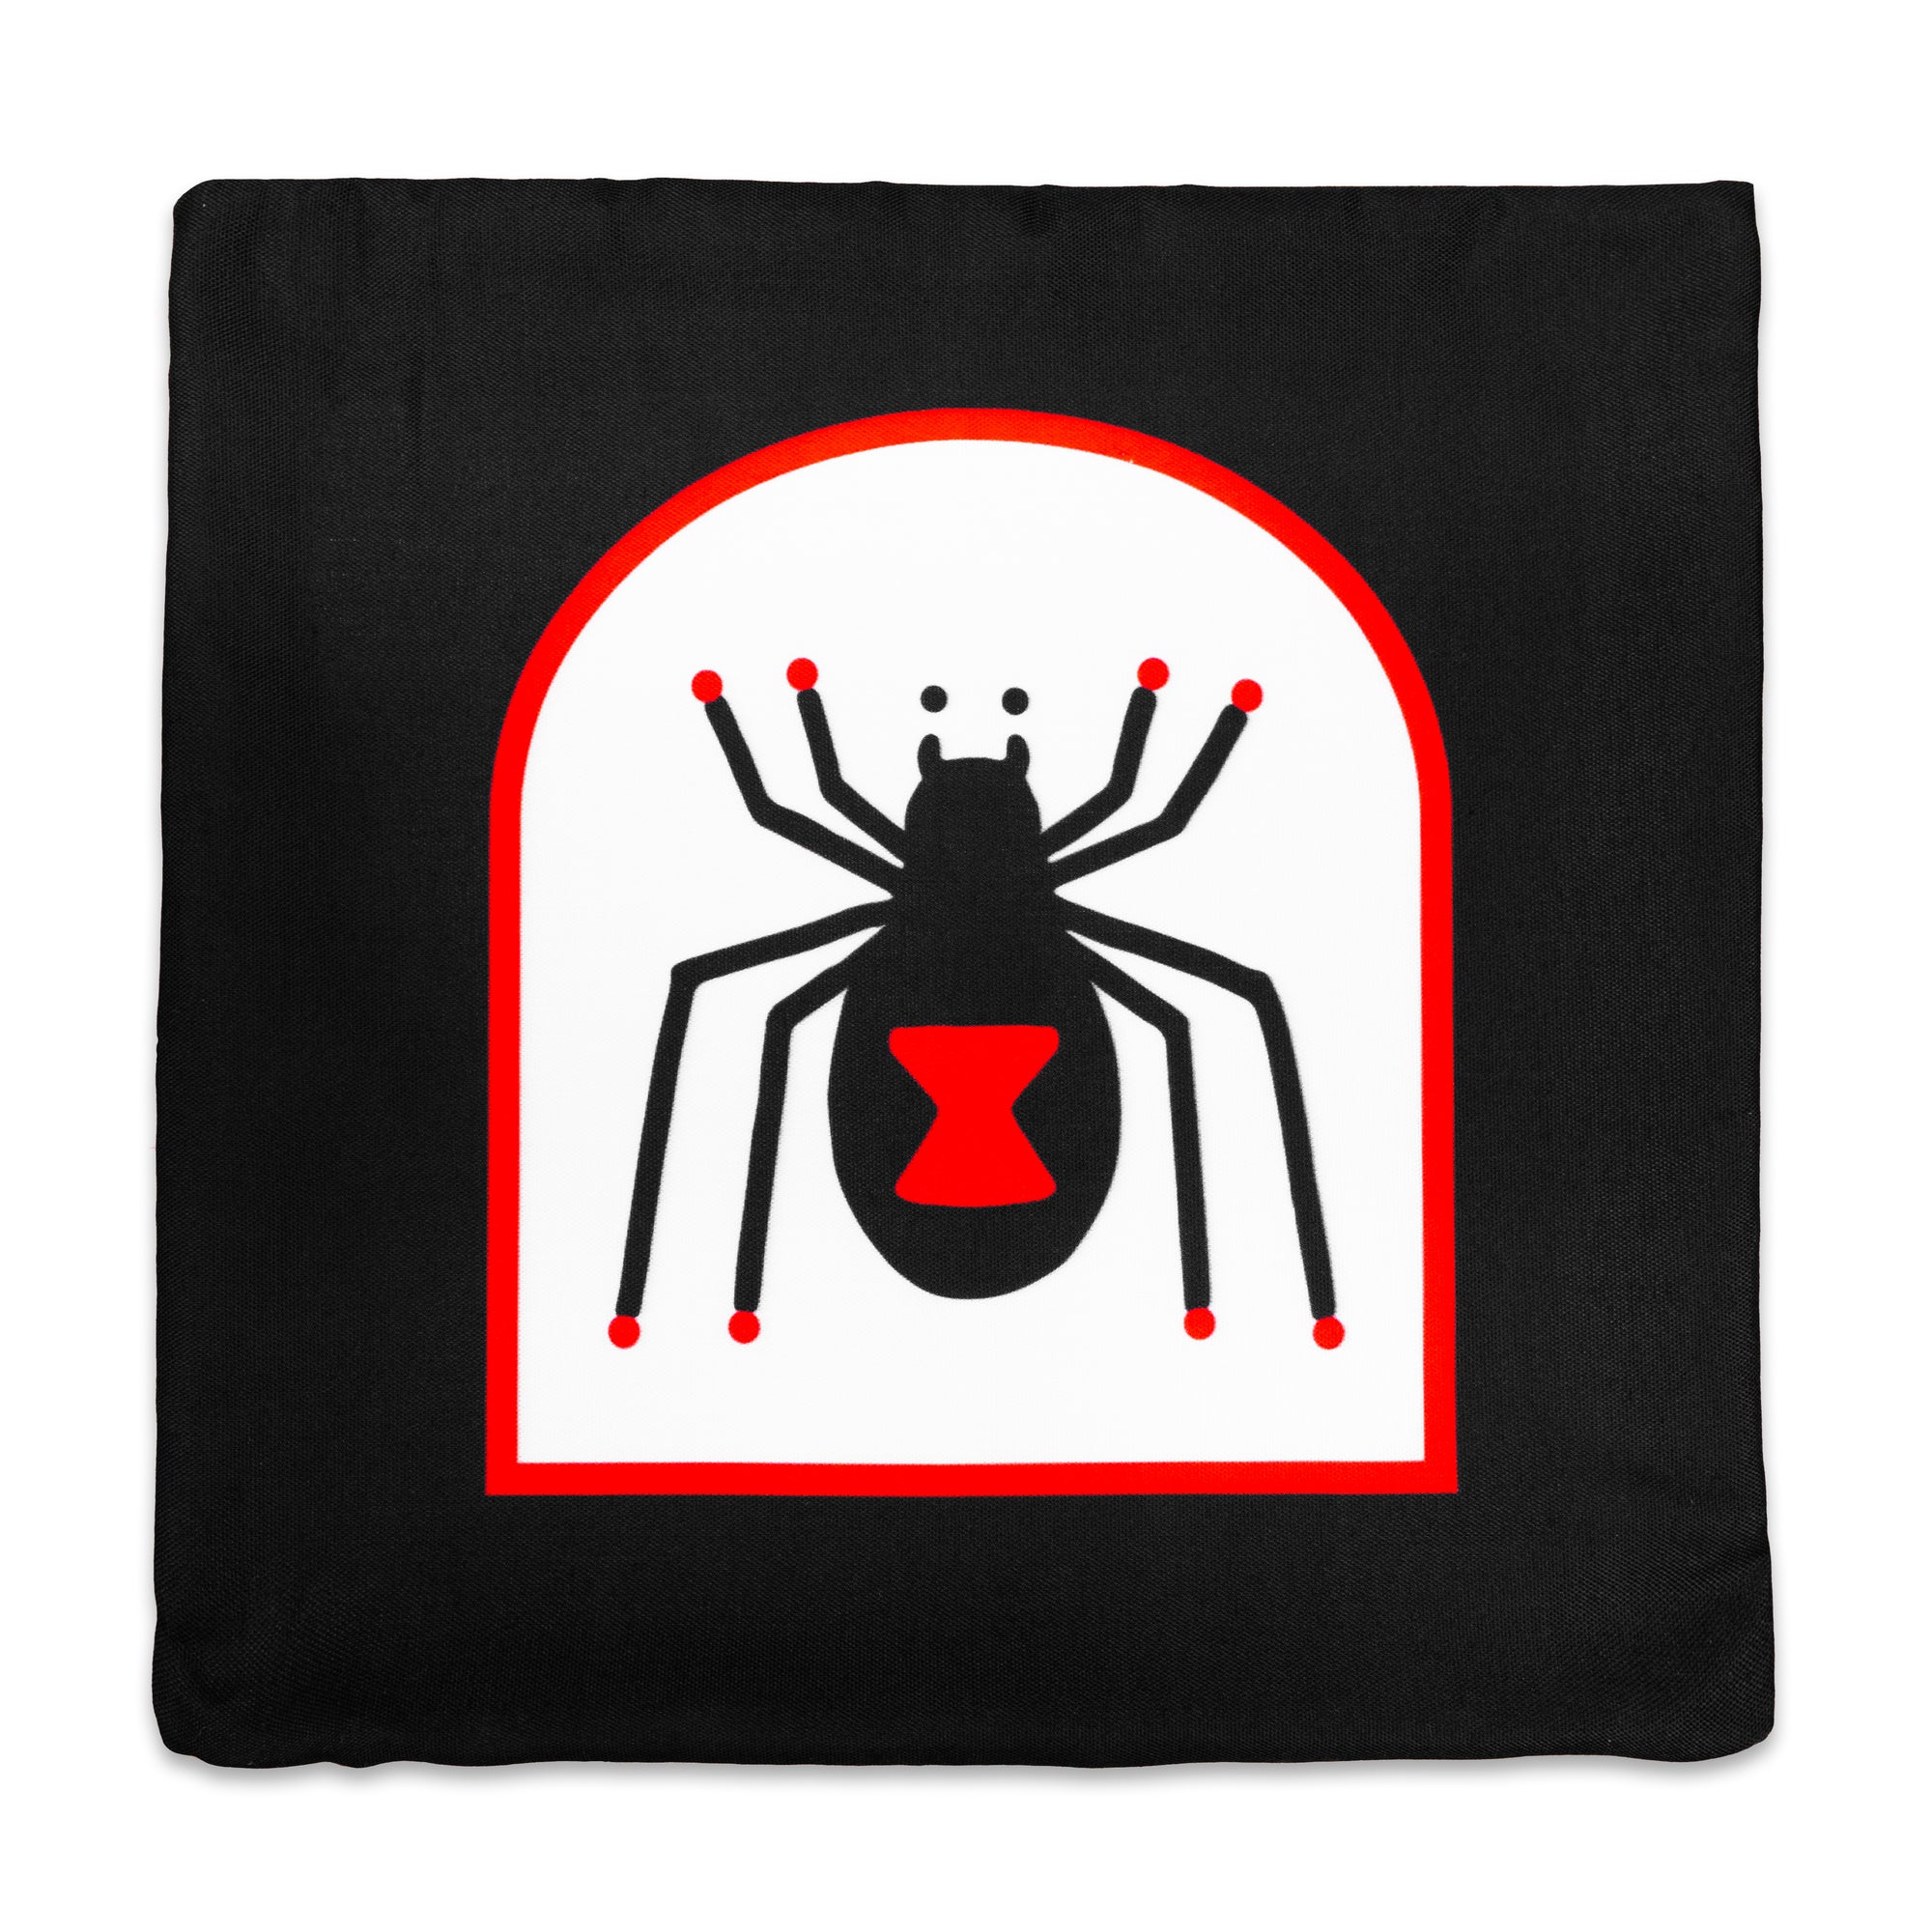 The "Devil & Black Widow" Pillowcase by No Fun®. Pillowcase is black, with a double sided design. One side has a red and white tombstone shape with a cartoon spider in the center. The Spider has a large, red, hourglass on its body.